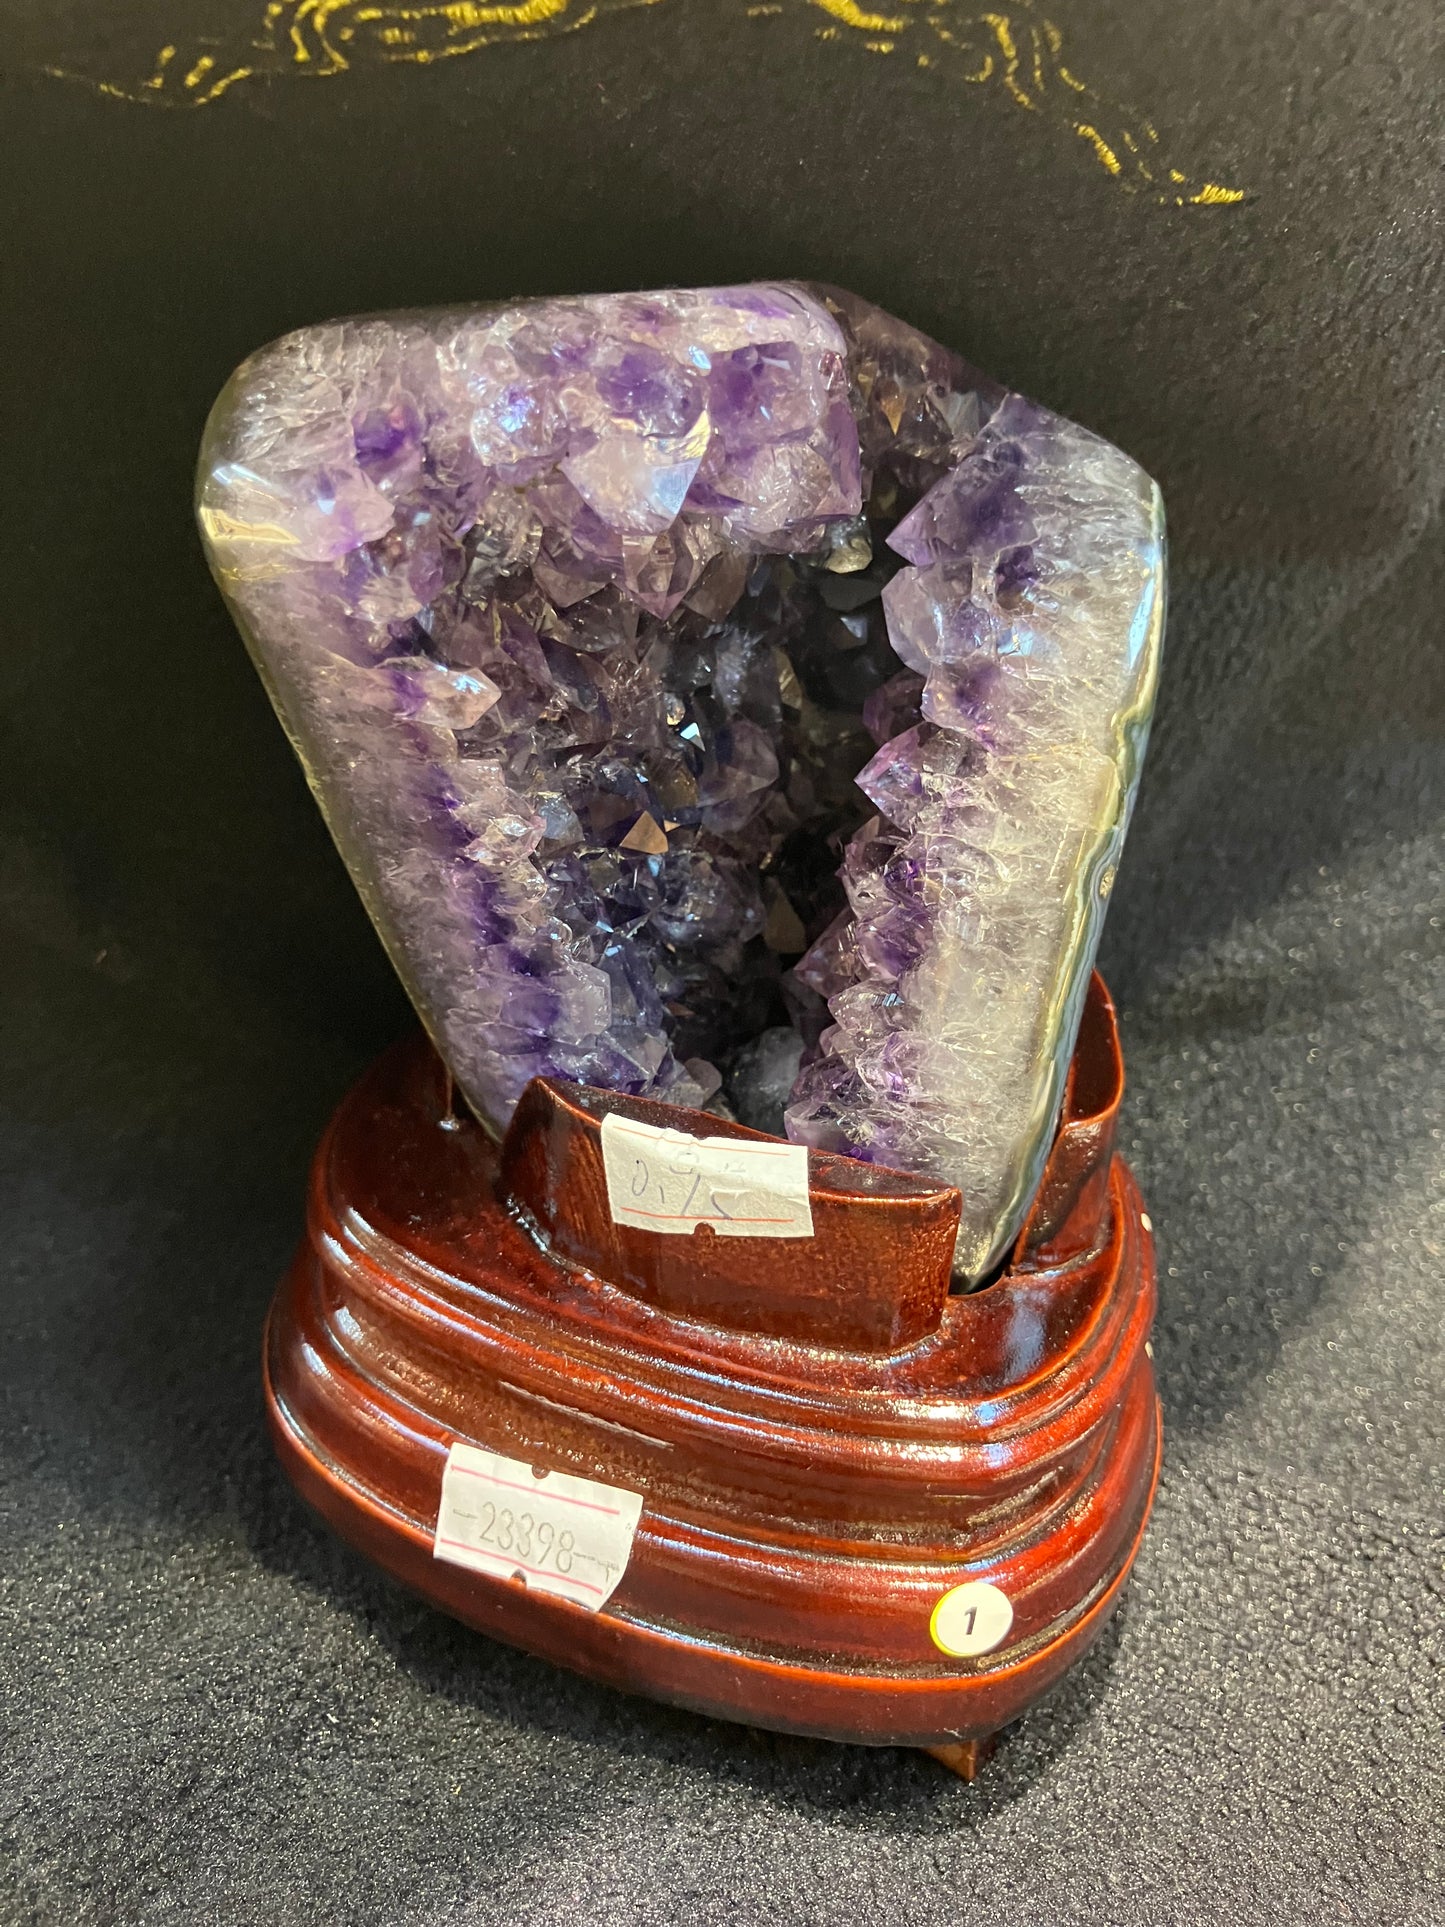 *RARE AGATE SHELL* 952g Natural Uruguay Amethyst Piece Fengshui Display with Wooden Base